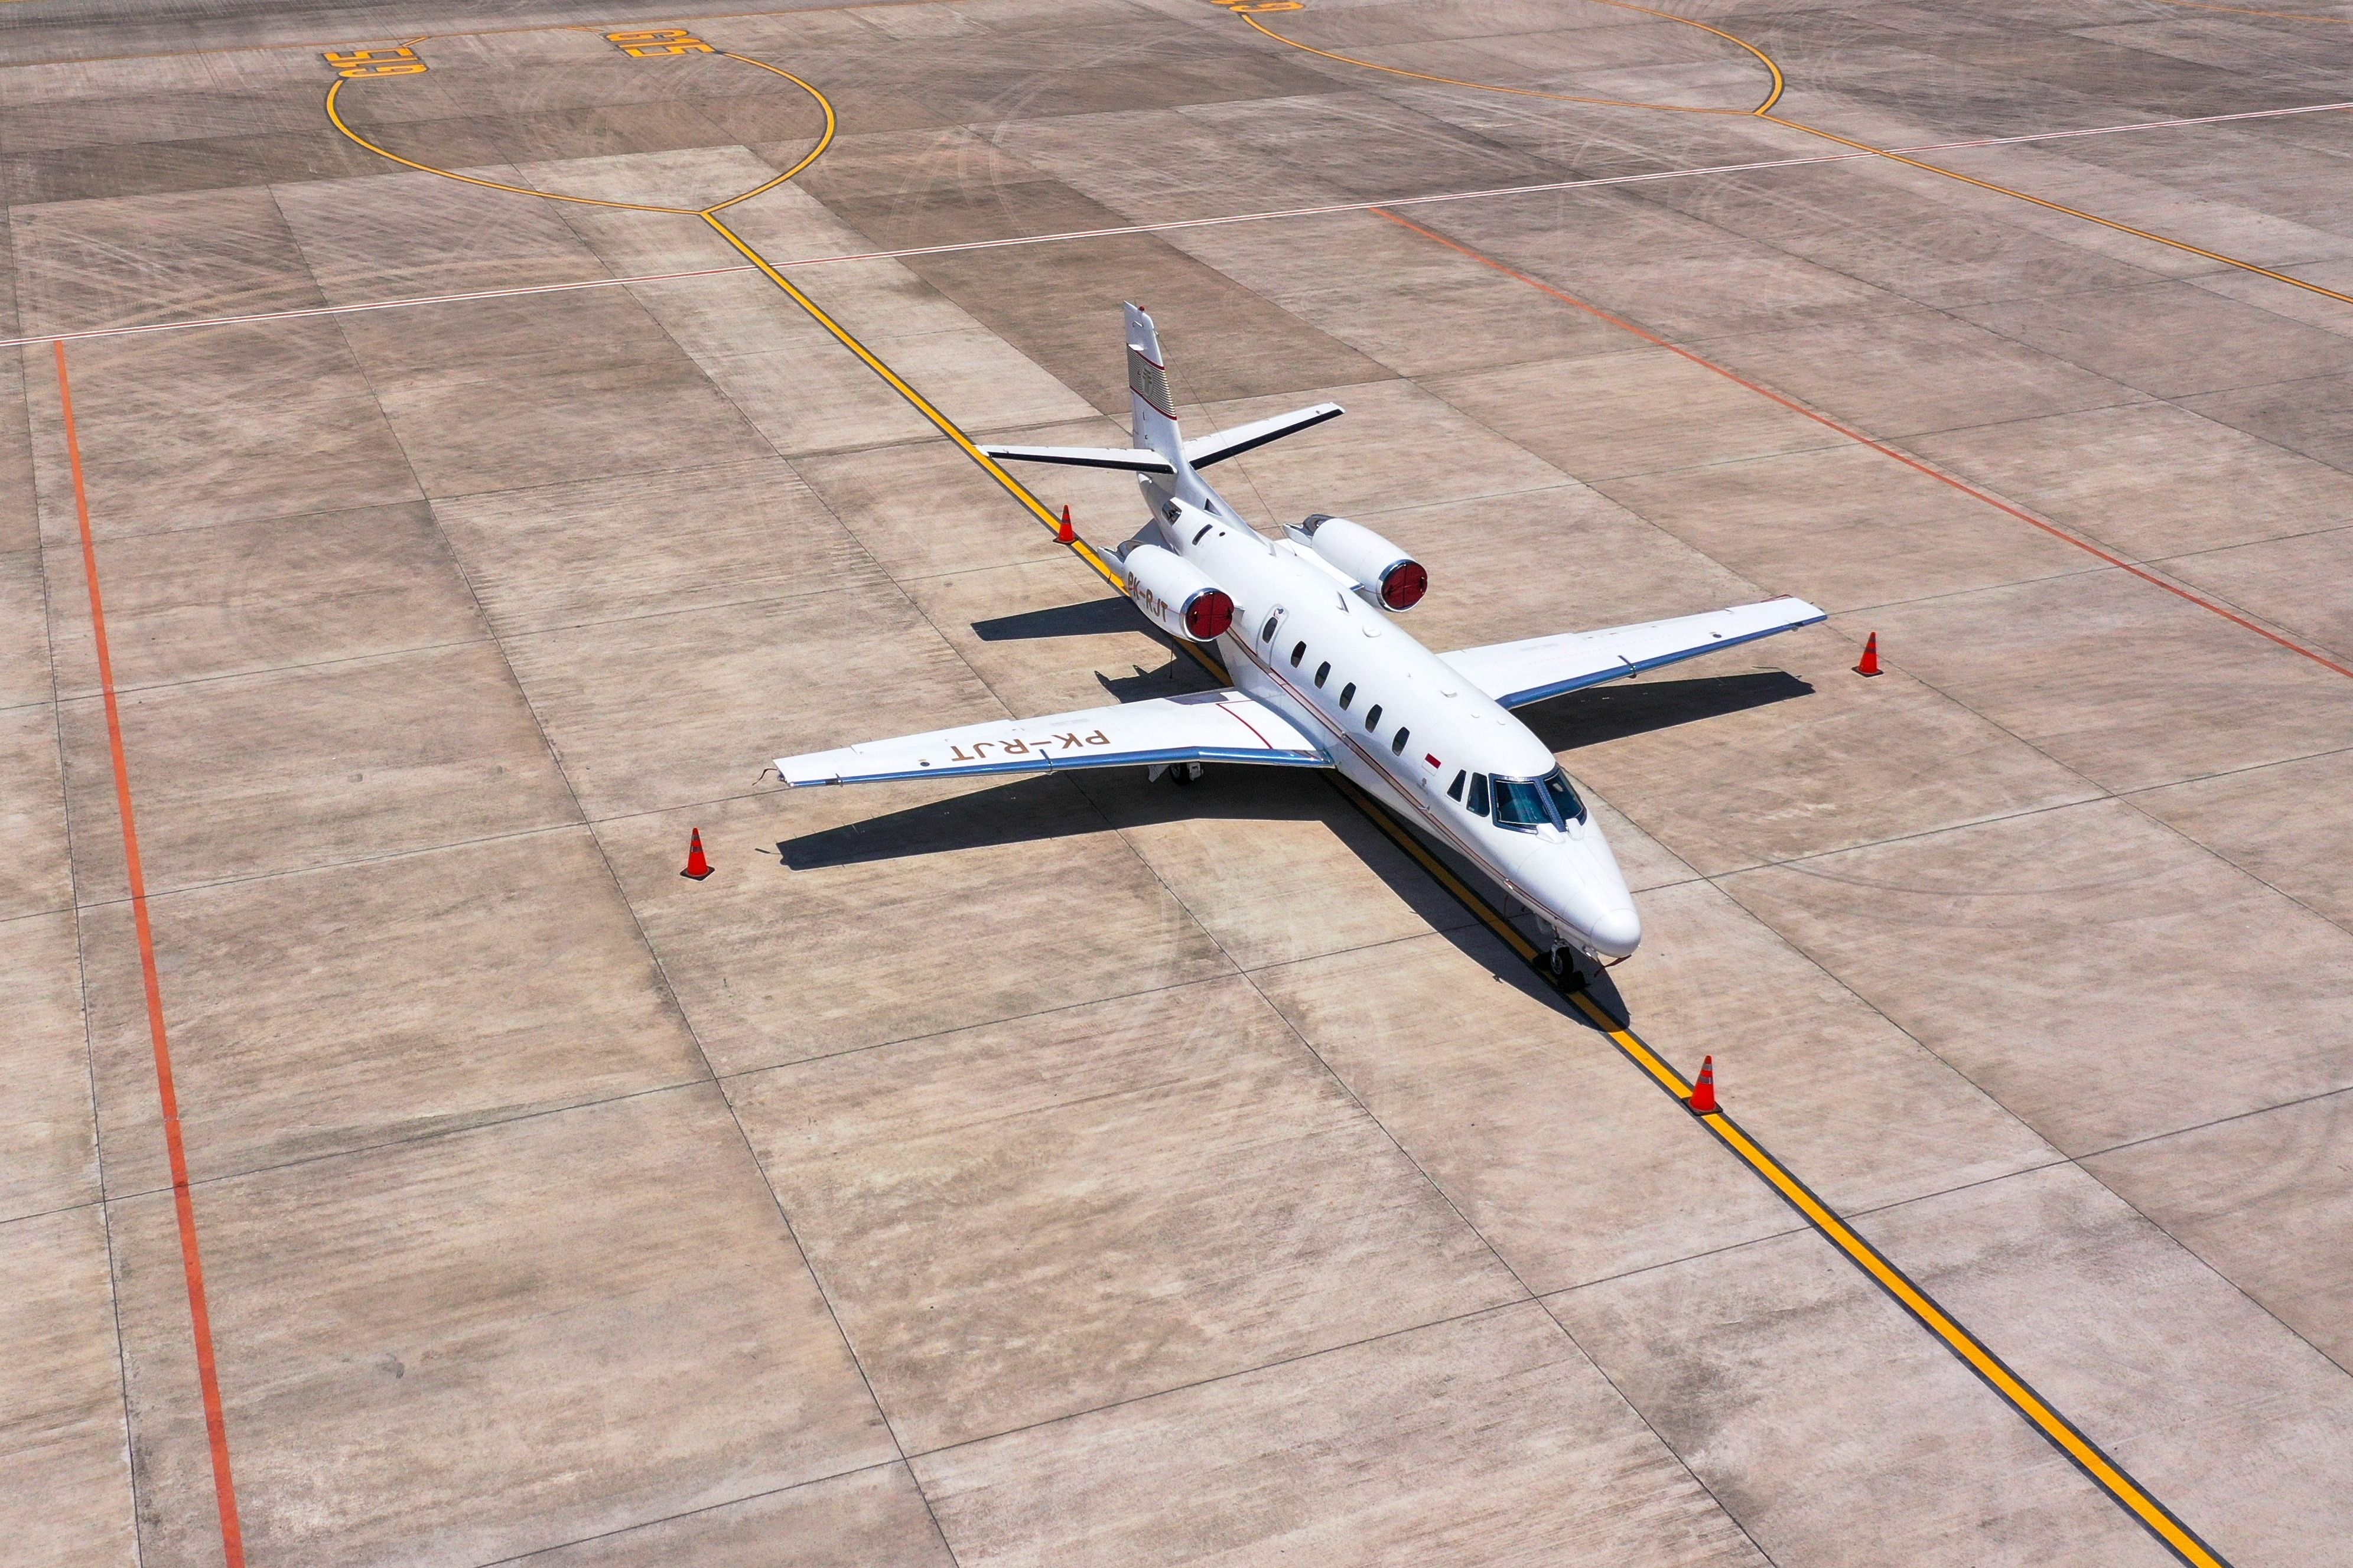 A Cessna 560 XLS parked on an airport apron.